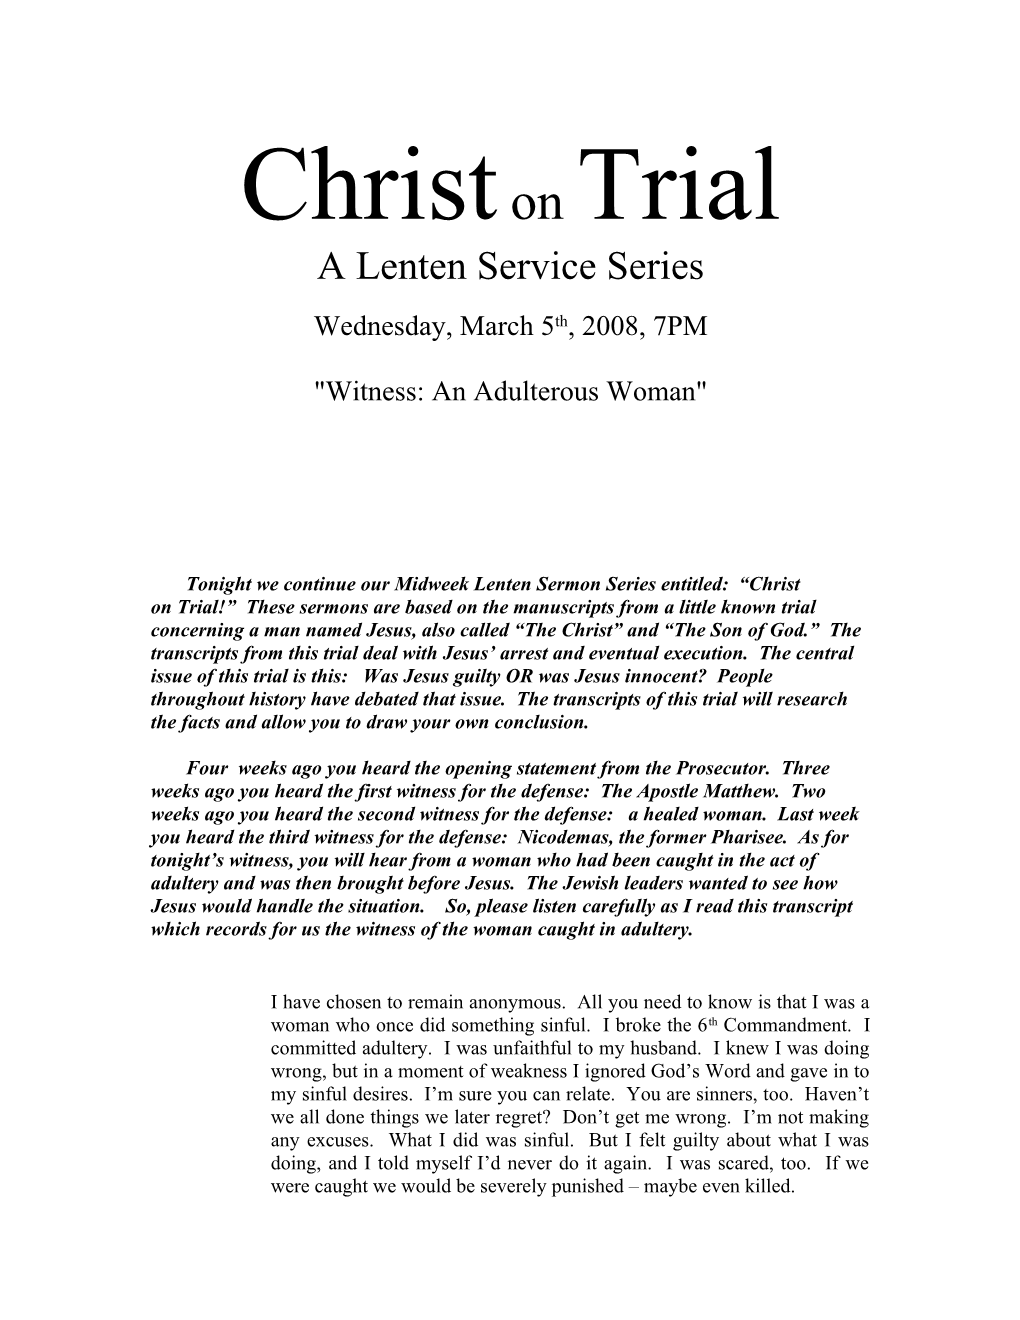 Christ on Trial